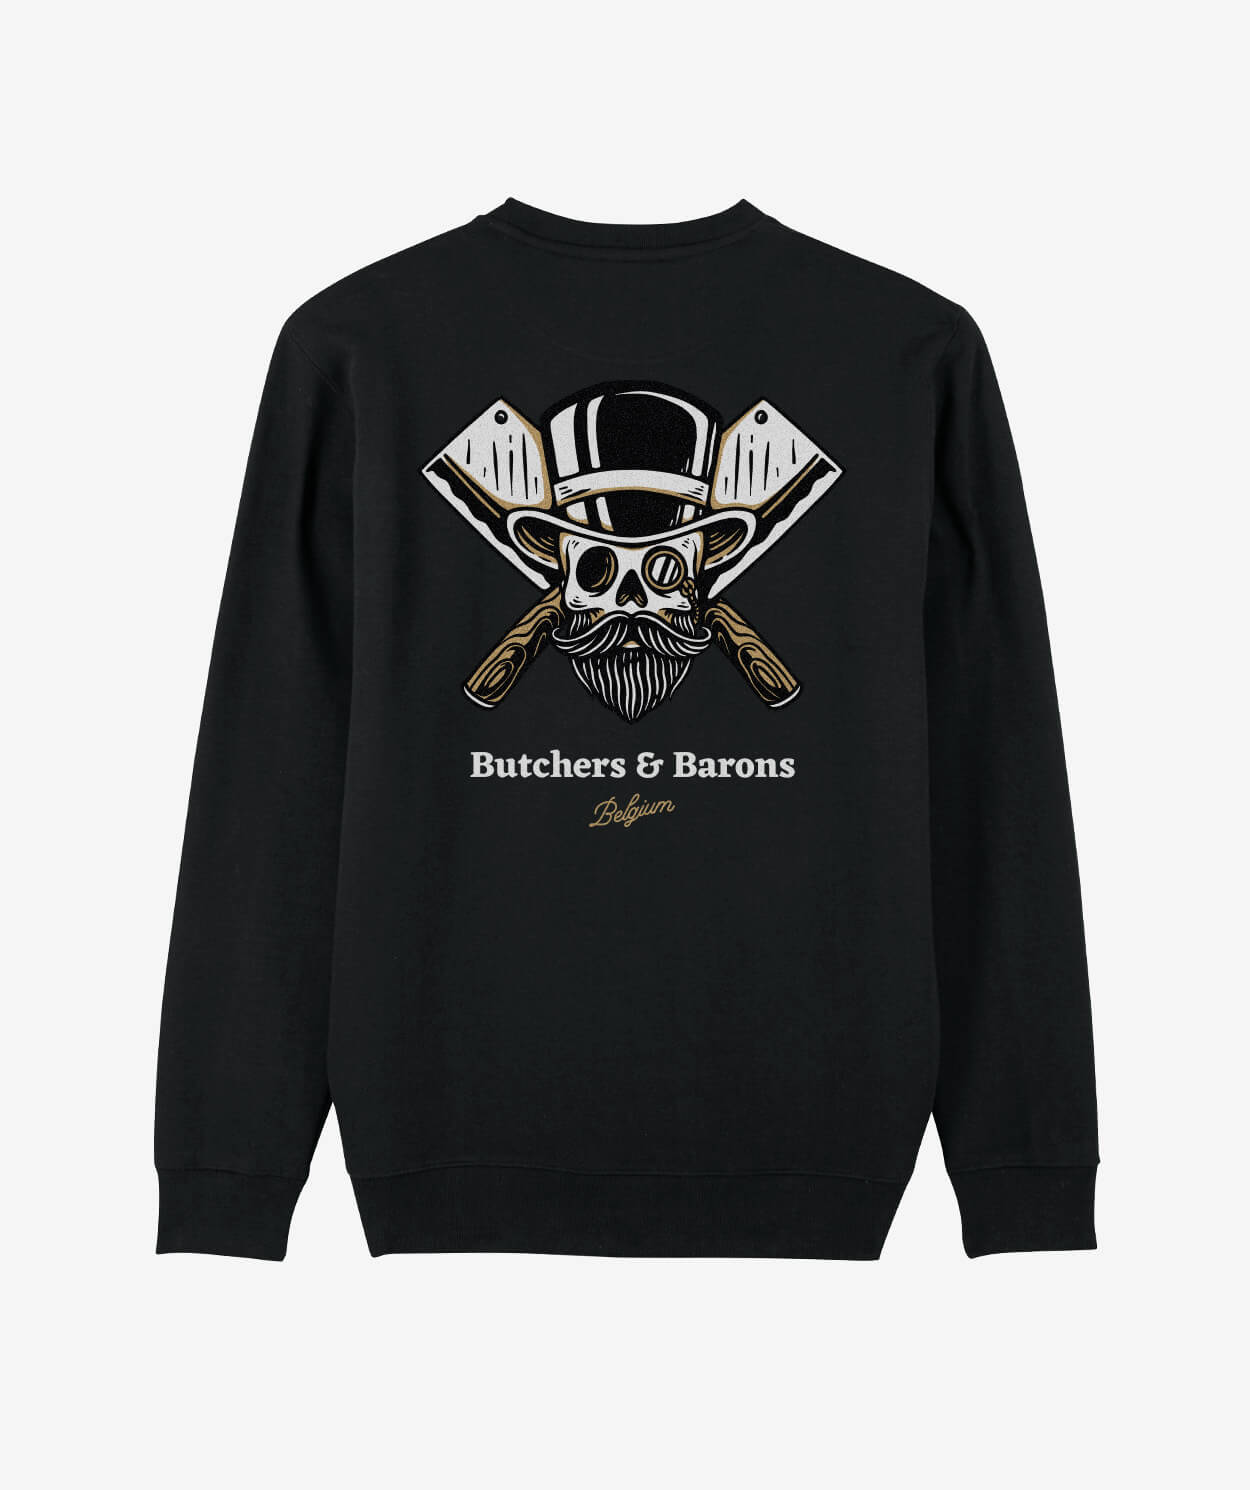 Loyalty black sweater by Butchers & Barons with skull, beard and monocle.